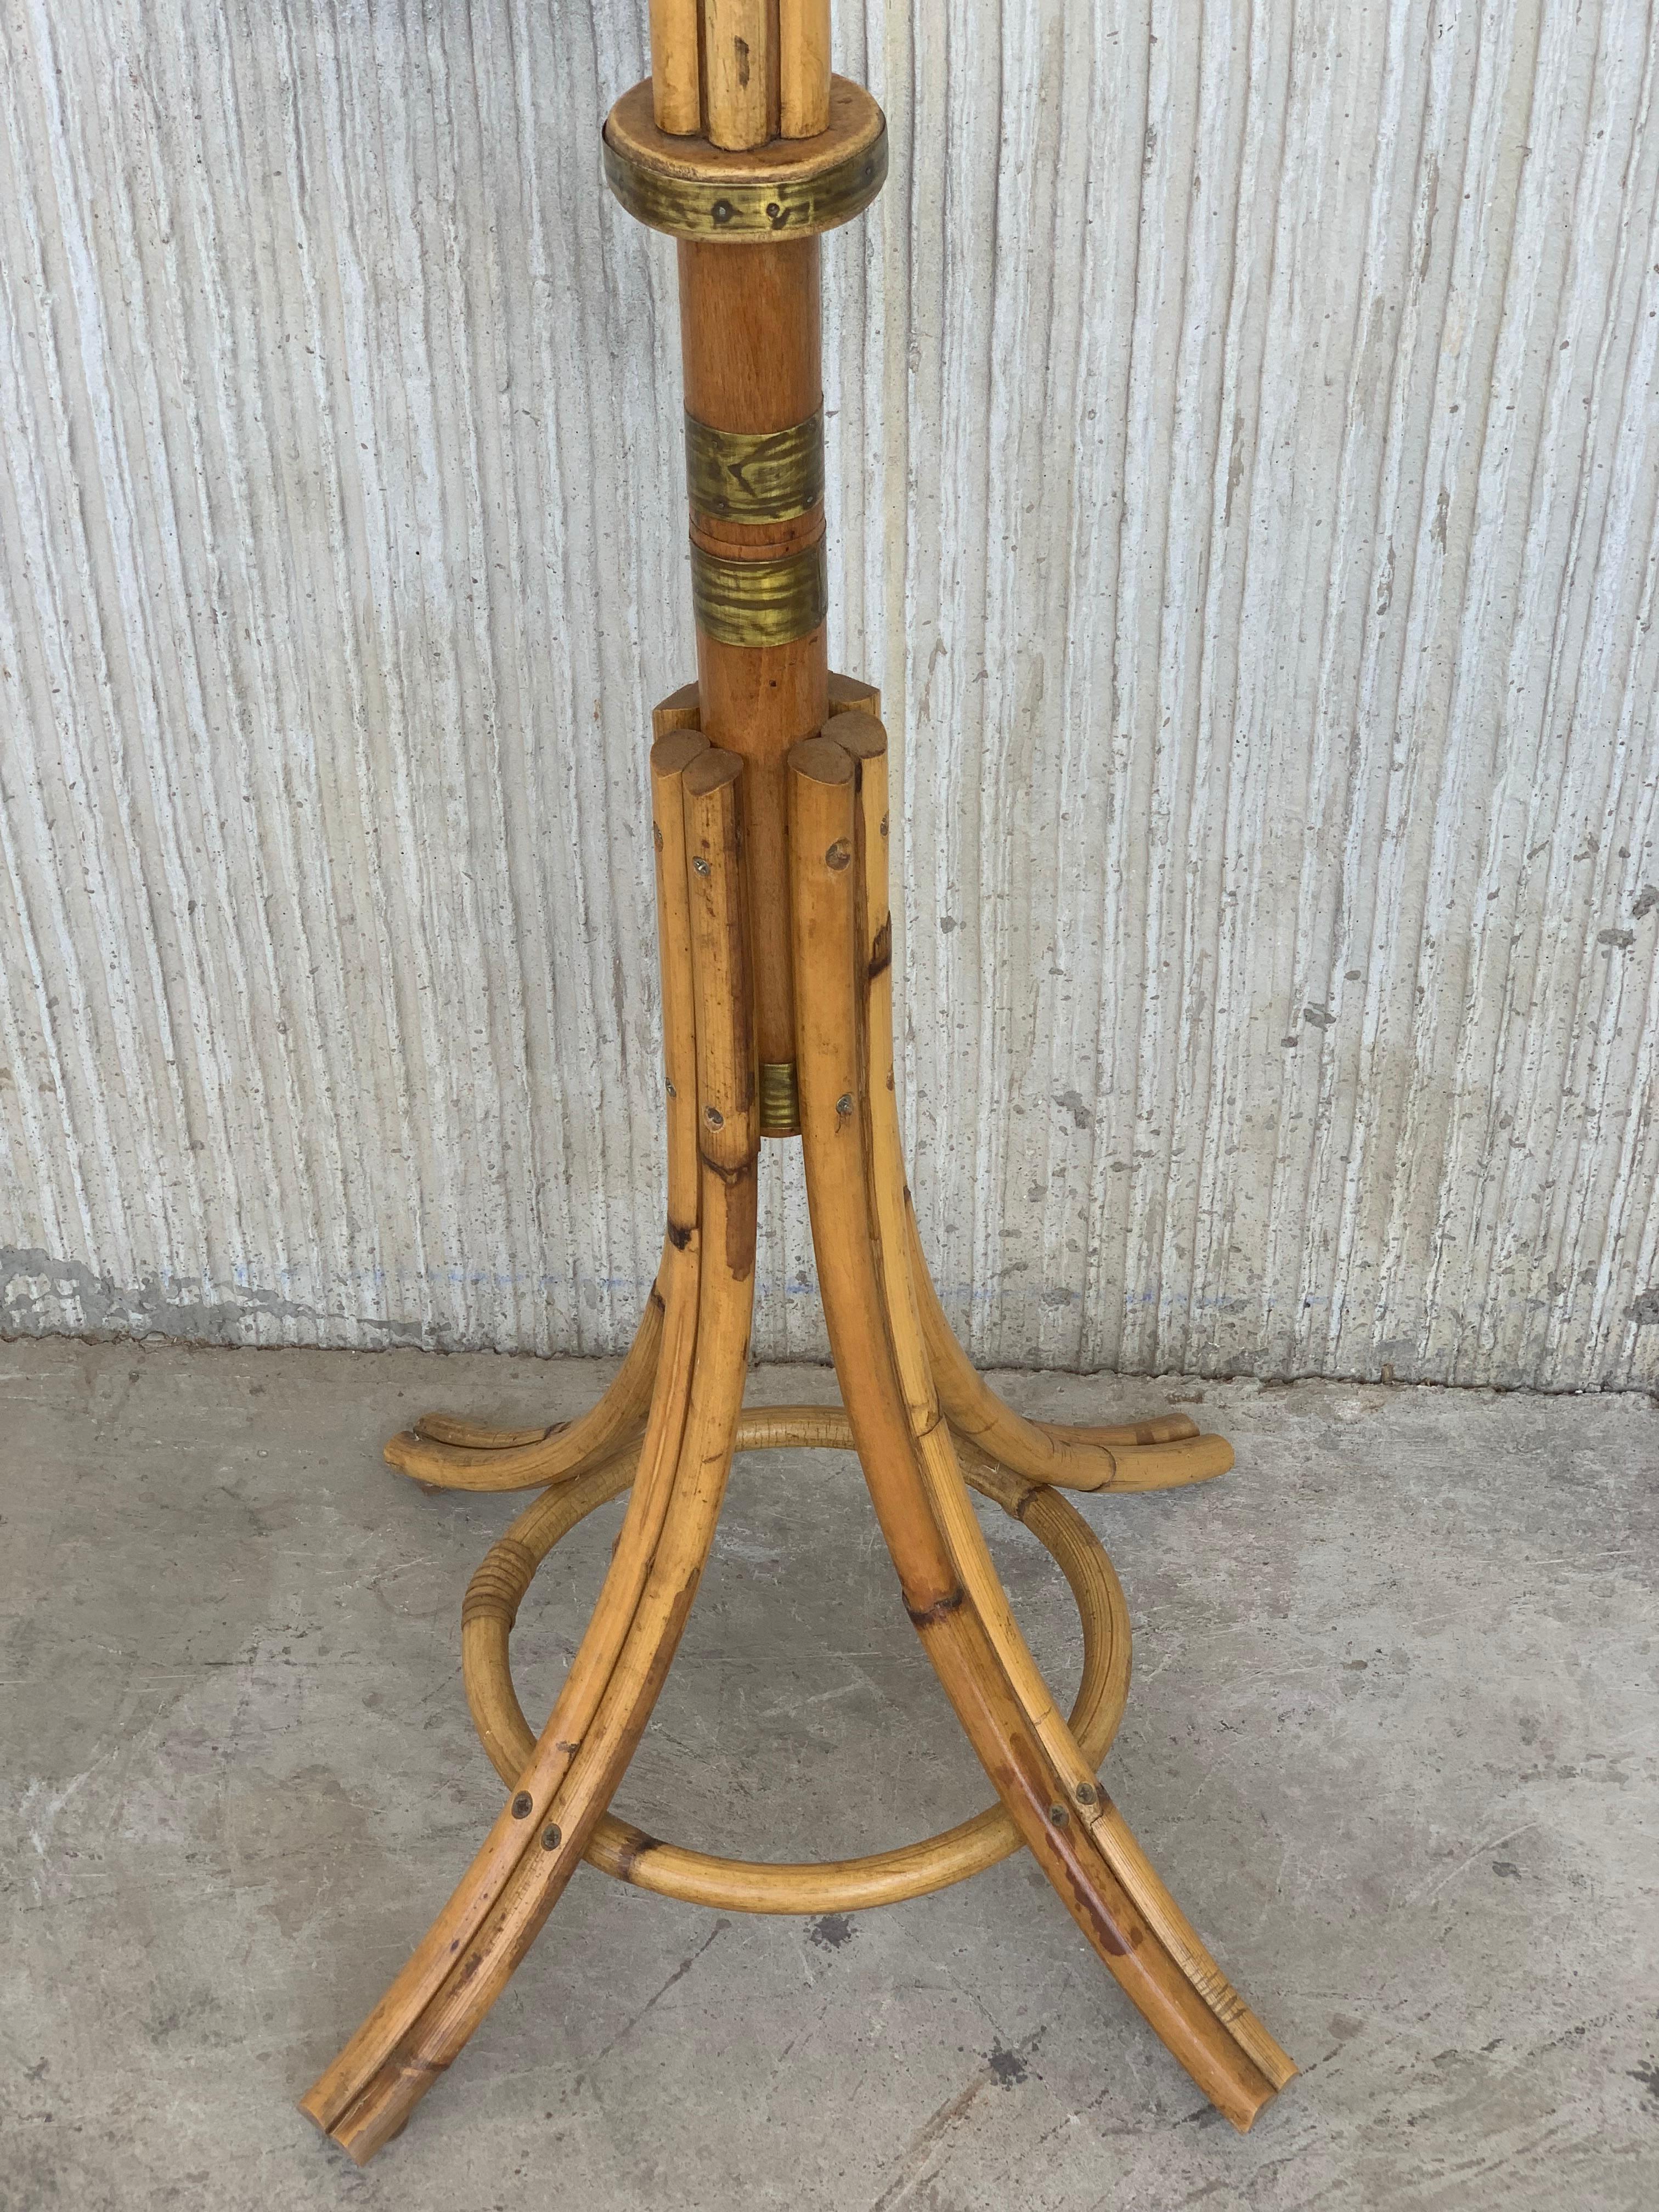 20th Century Midcentury Bamboo Coat Rack or Stand with Six Double Hangers and Brass